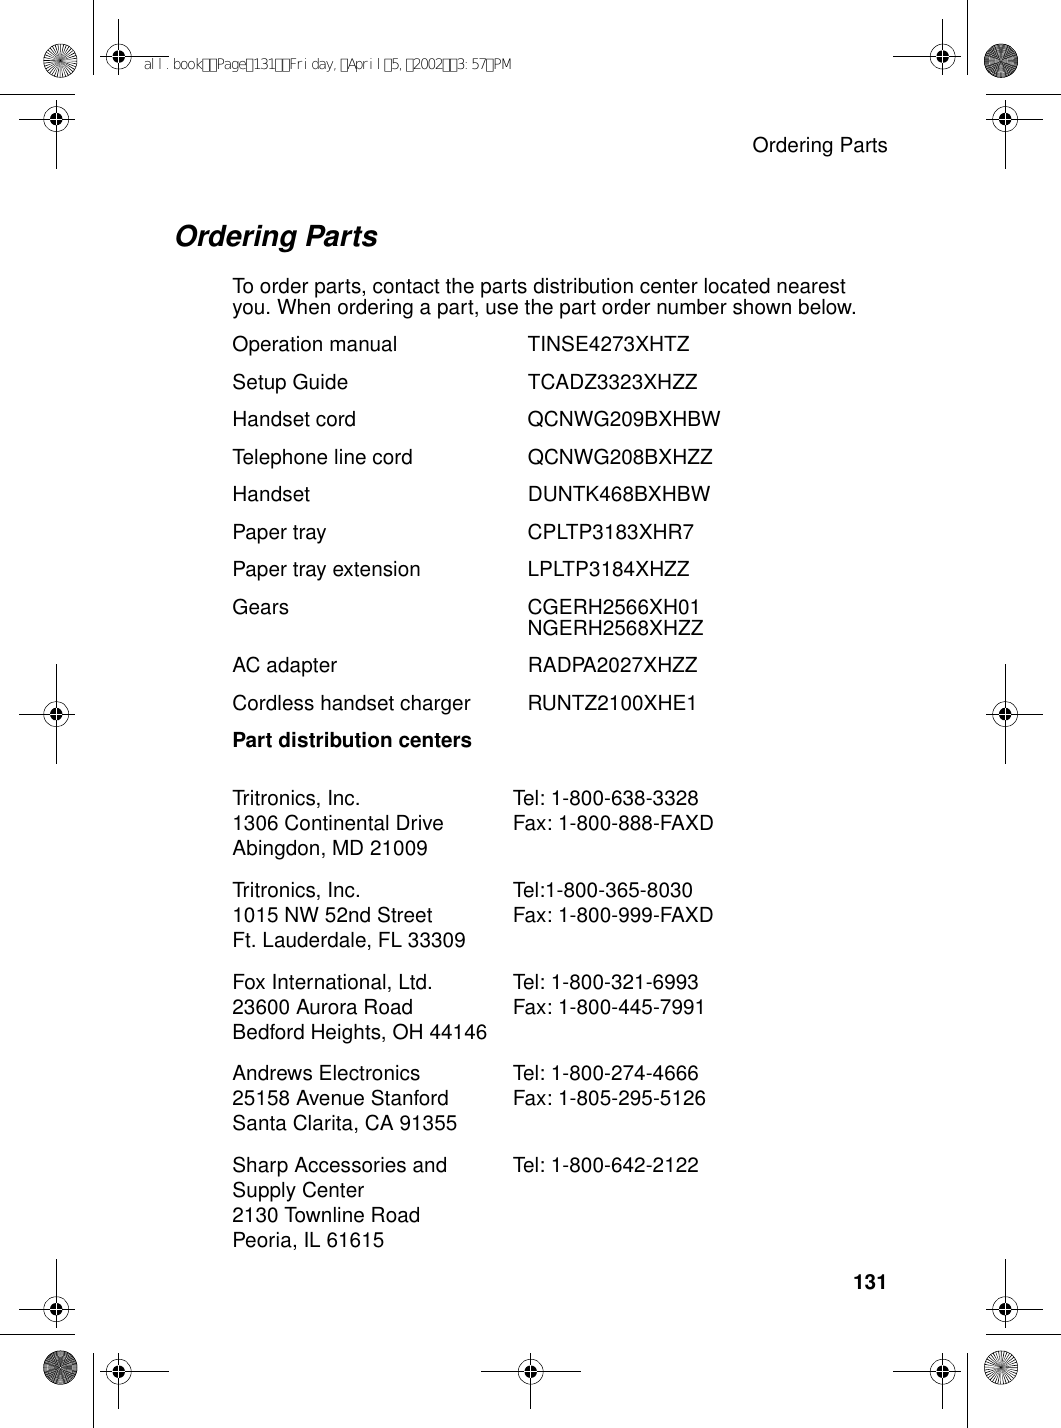 Ordering Parts131Ordering PartsTo order parts, contact the parts distribution center located nearest you. When ordering a part, use the part order number shown below. Operation manual  TINSE4273XHTZSetup Guide TCADZ3323XHZZHandset cord QCNWG209BXHBWTelephone line cord QCNWG208BXHZZHandset DUNTK468BXHBWPaper tray CPLTP3183XHR7Paper tray extension  LPLTP3184XHZZGears CGERH2566XH01NGERH2568XHZZAC adapter RADPA2027XHZZCordless handset charger RUNTZ2100XHE1Part distribution centers Tritronics, Inc. 1306 Continental Drive Abingdon, MD 21009Tel: 1-800-638-3328 Fax: 1-800-888-FAXD Tritronics, Inc. 1015 NW 52nd Street Ft. Lauderdale, FL 33309Tel:1-800-365-8030 Fax: 1-800-999-FAXDFox International, Ltd. 23600 Aurora Road Bedford Heights, OH 44146Tel: 1-800-321-6993 Fax: 1-800-445-7991Andrews Electronics 25158 Avenue Stanford Santa Clarita, CA 91355Tel: 1-800-274-4666 Fax: 1-805-295-5126Sharp Accessories and Supply Center 2130 Townline Road Peoria, IL 61615Tel: 1-800-642-2122all.bookPage131Friday,April5,20023:57PM